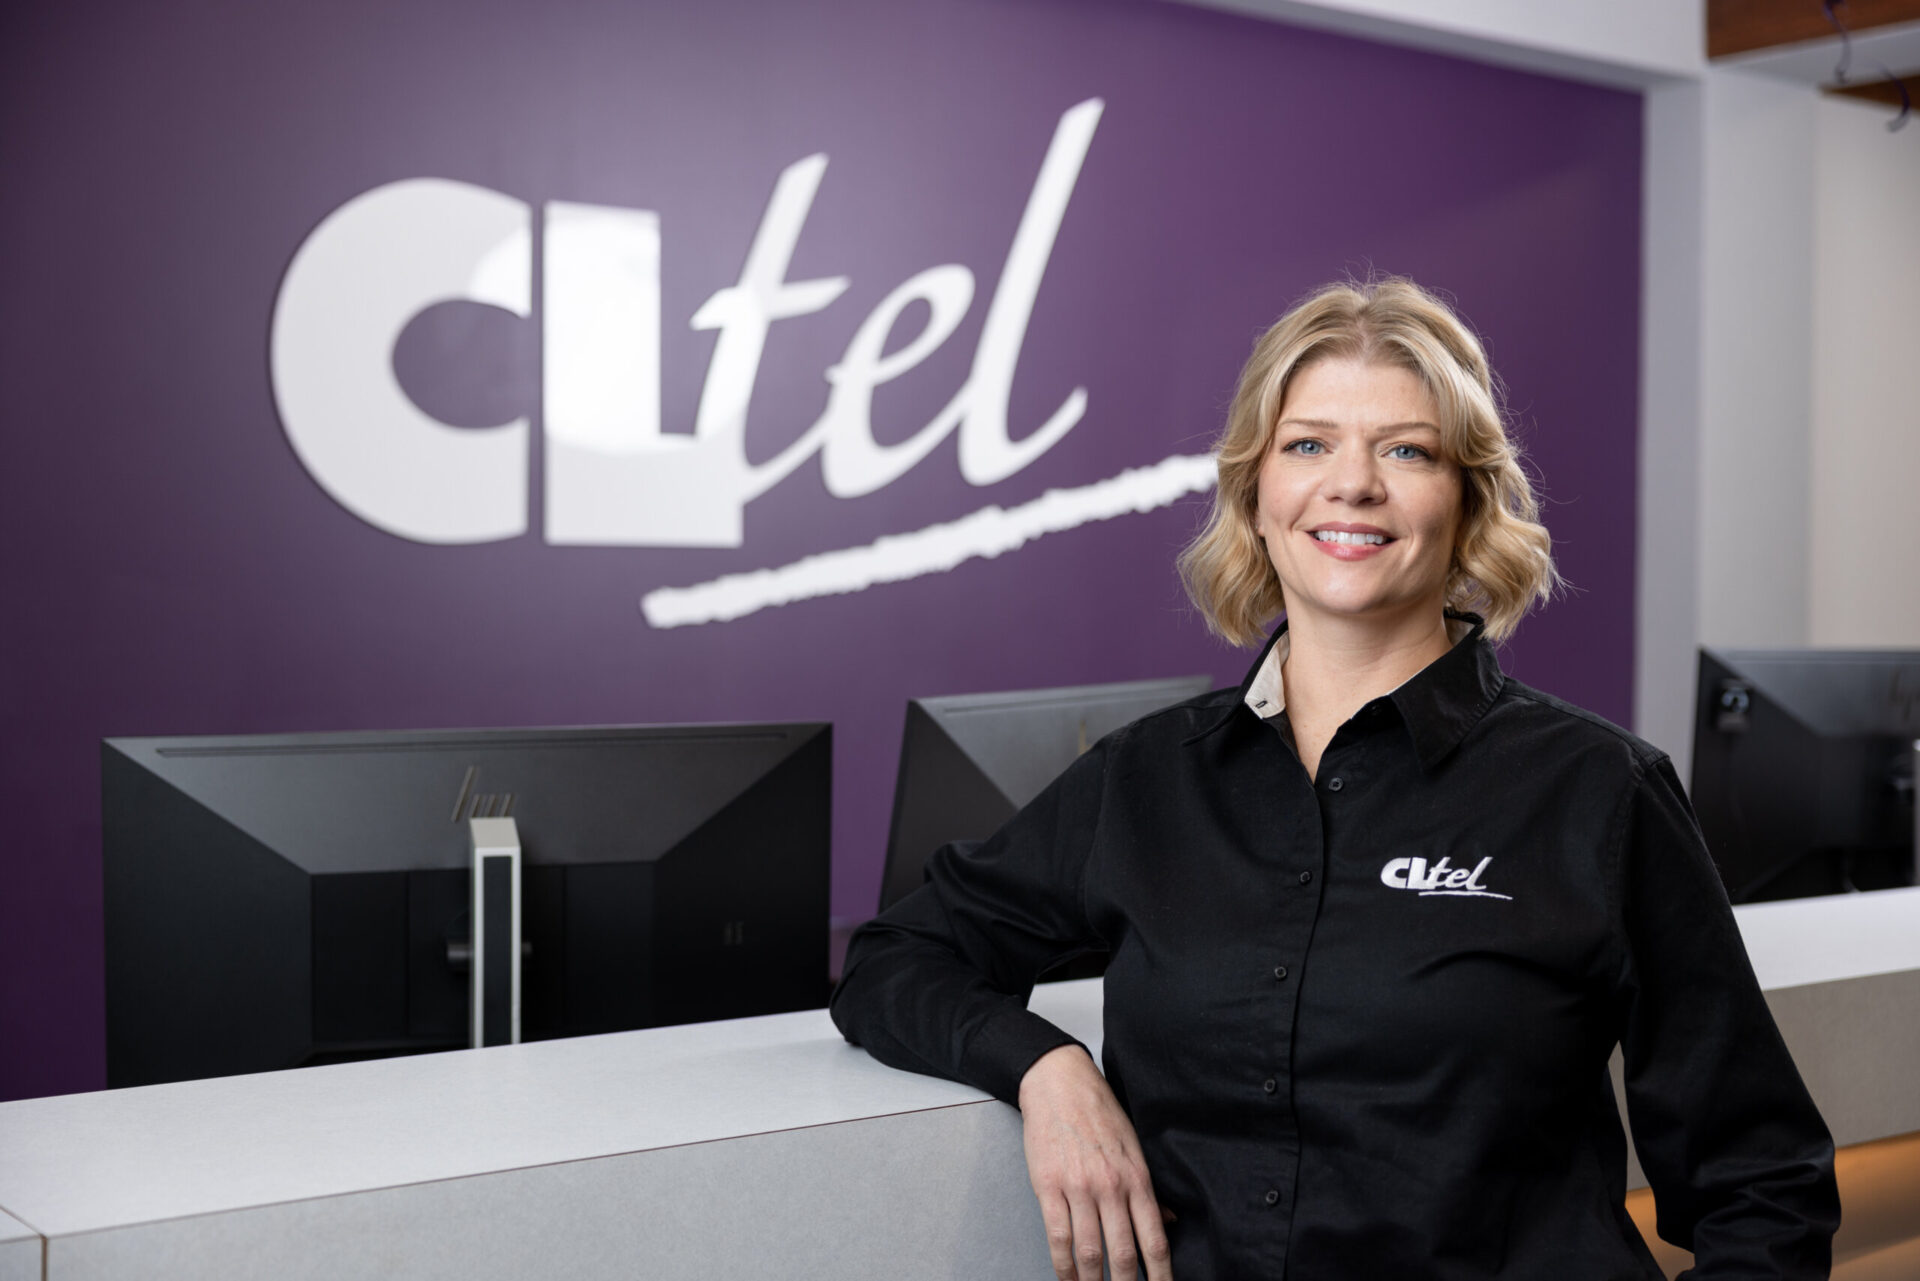 CLtel home internet and TV